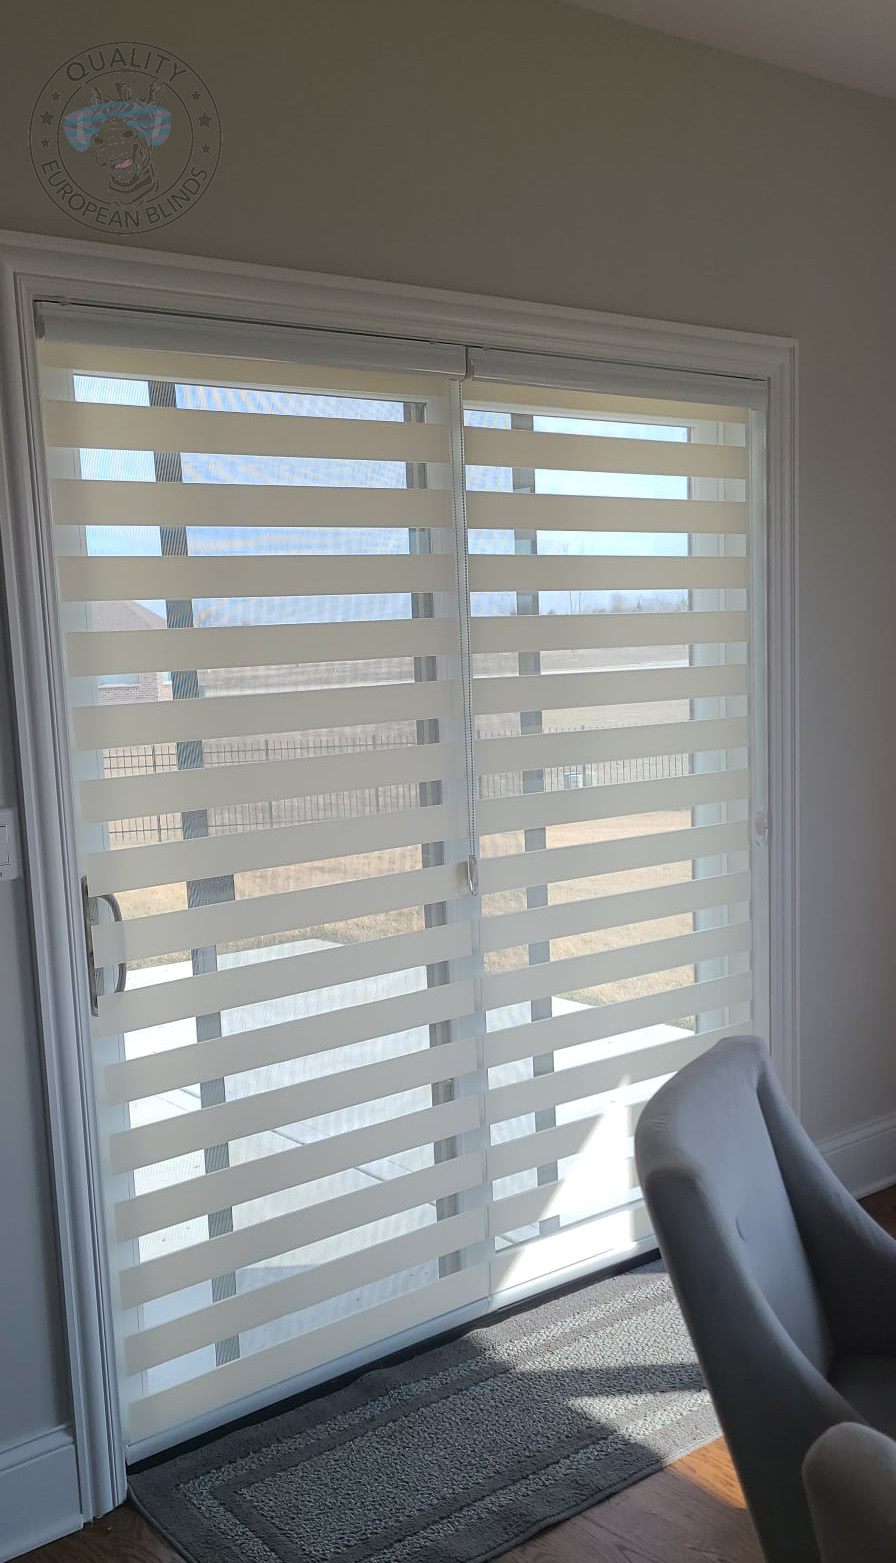 COMPLETED PROJECTS www.qualityeuropeanblinds.com